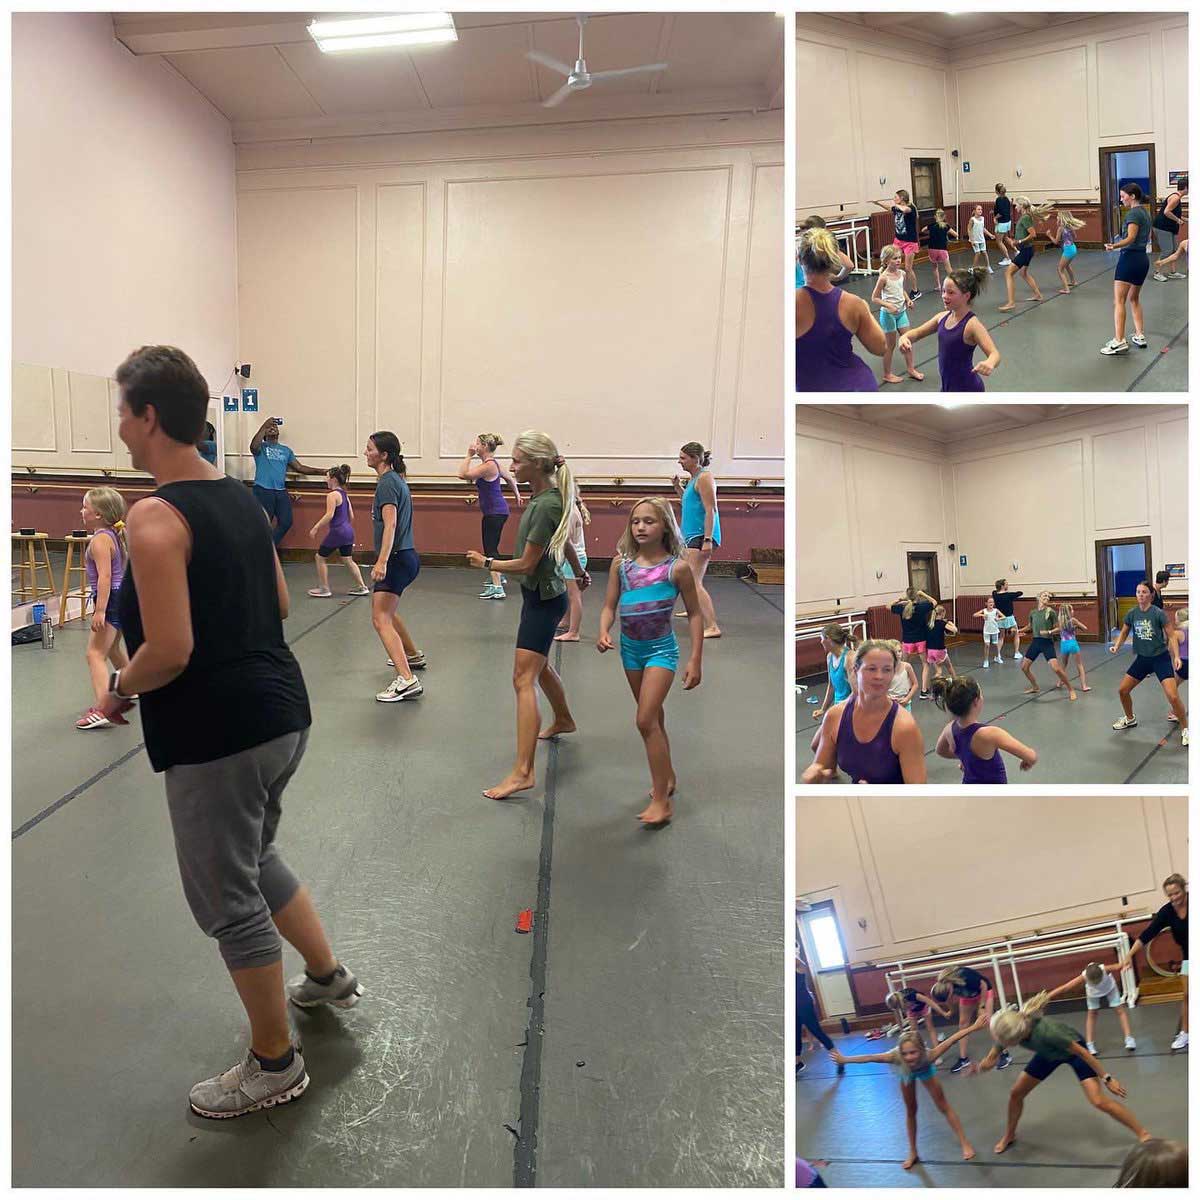 Dance Instructors from Central Dance Academy in Le Mars, IA